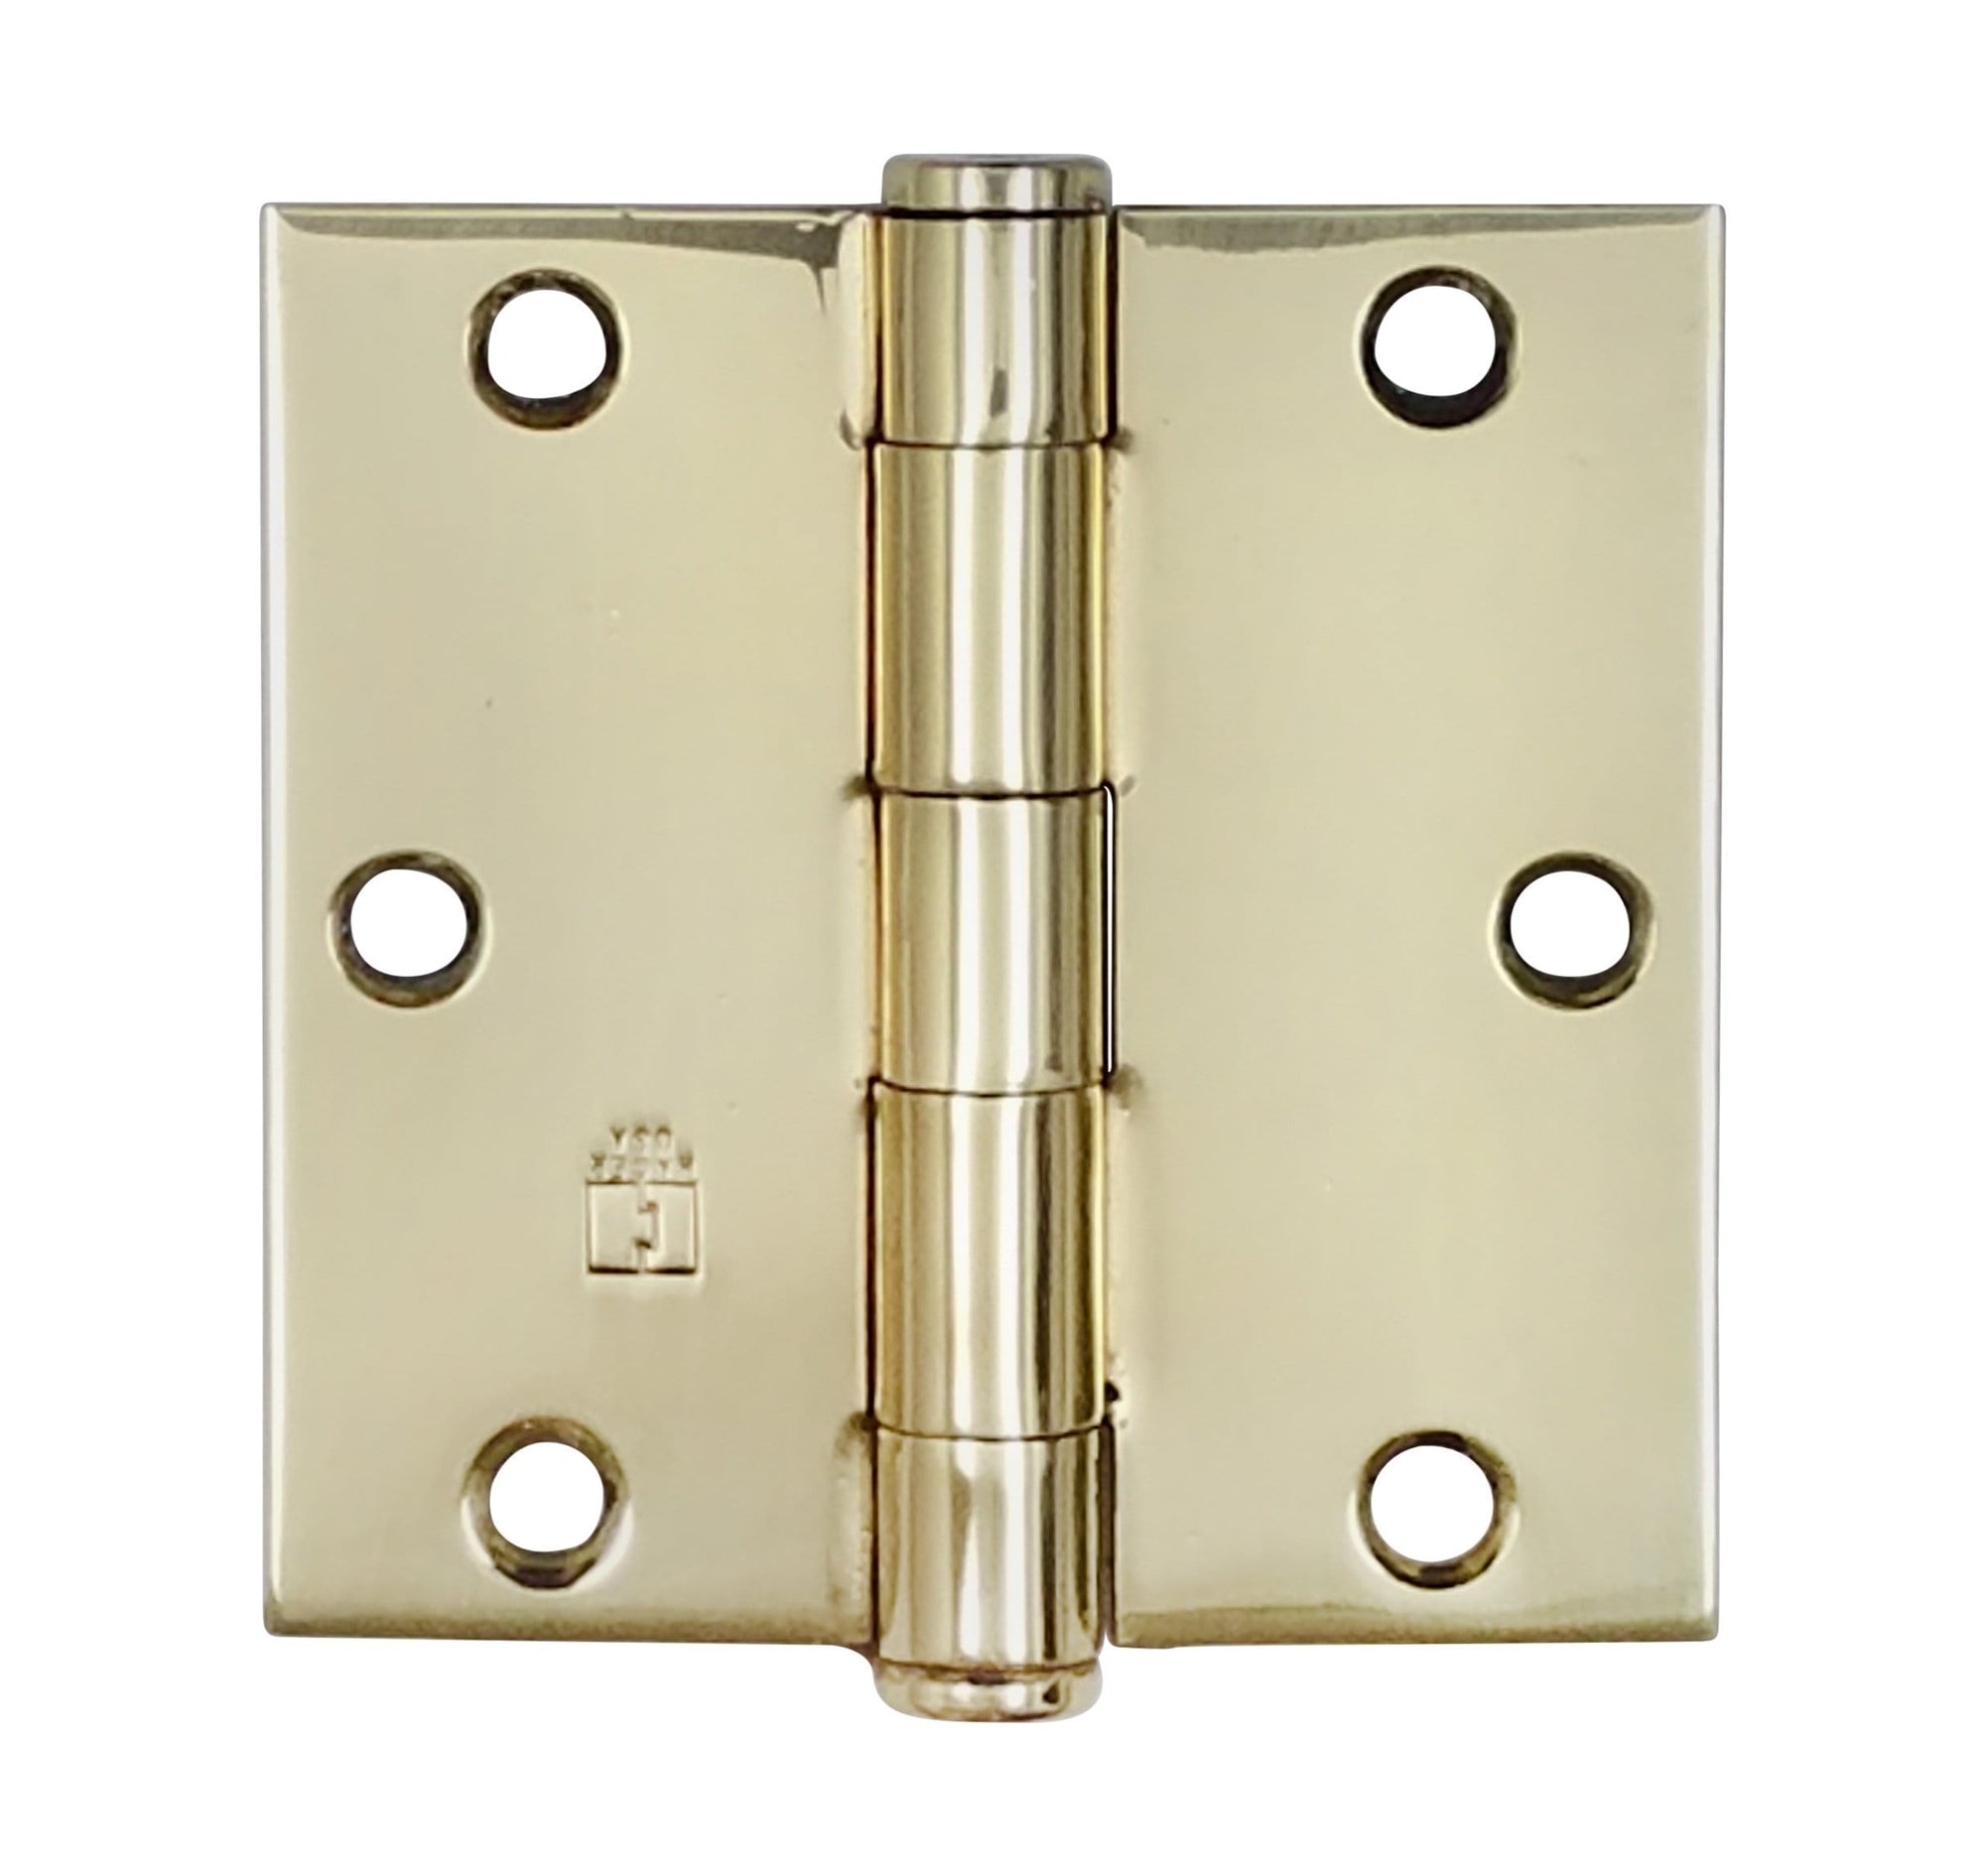 Hager Door Hinges - 3.5" Inch Square - Multiple Finishes - Sold Individually